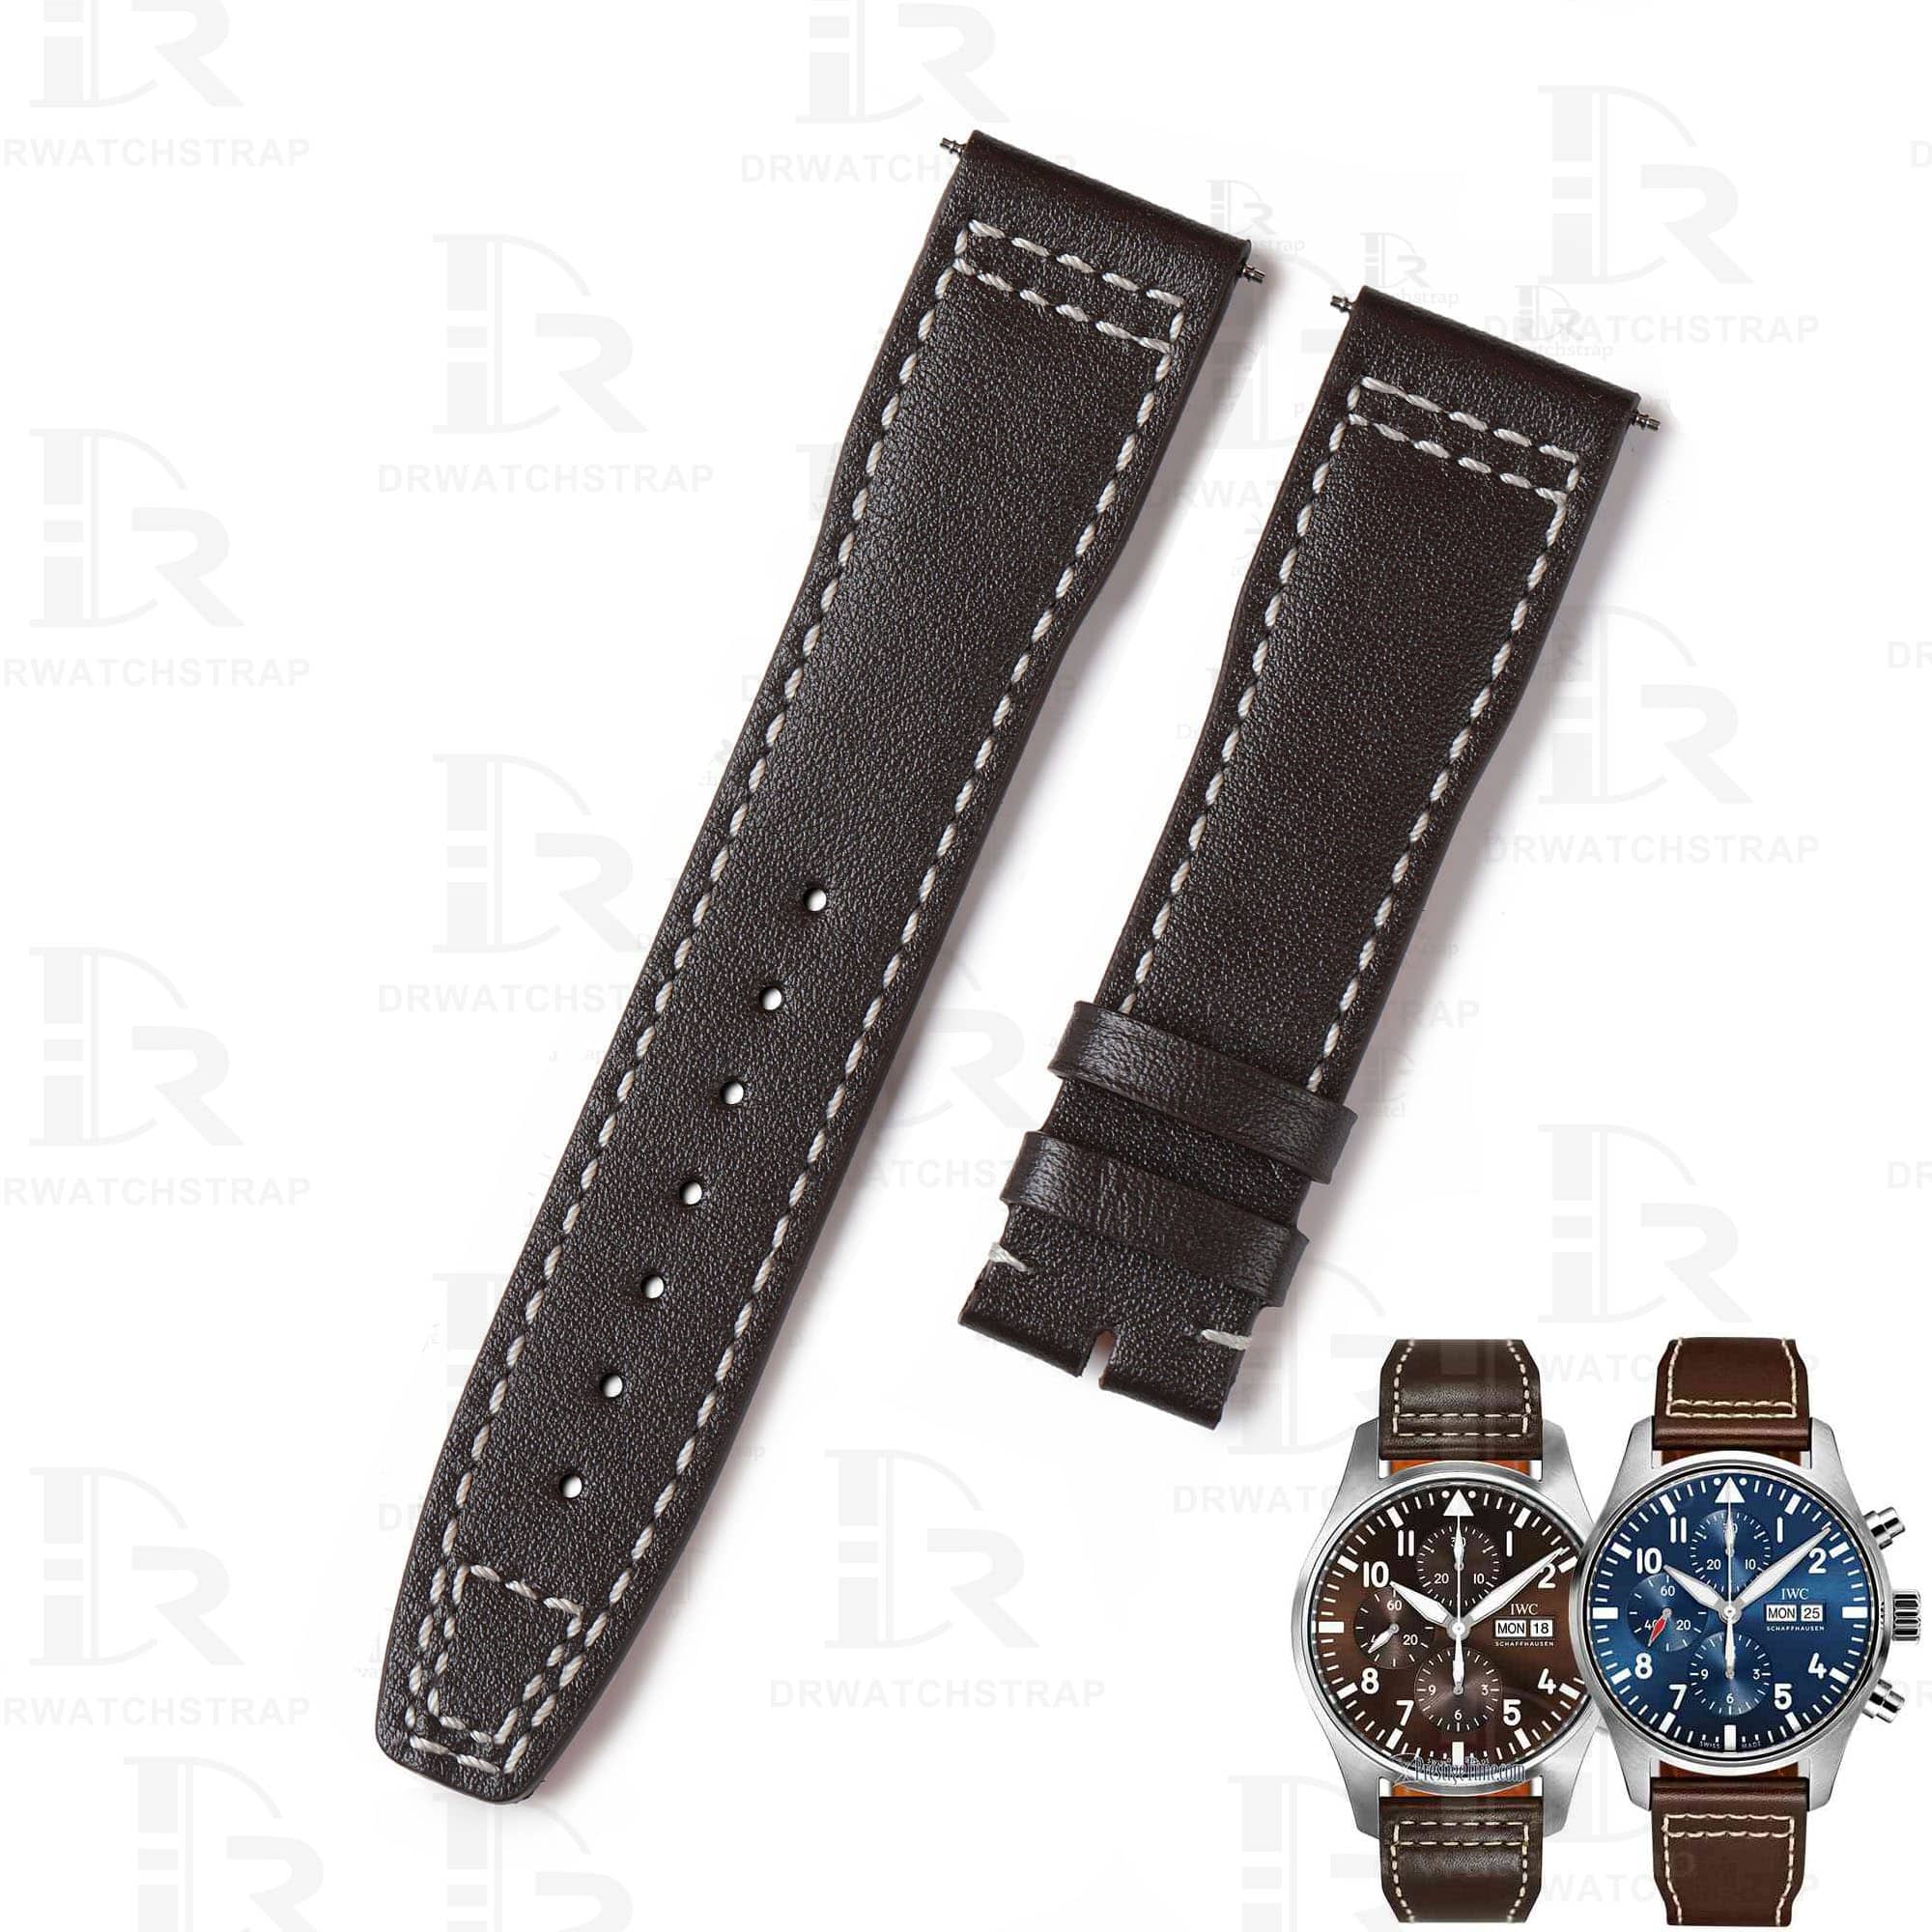 Custom Black replacement leather watch band 20mm 21mm watch strap replacement for IWC Pilot Mark XVIII